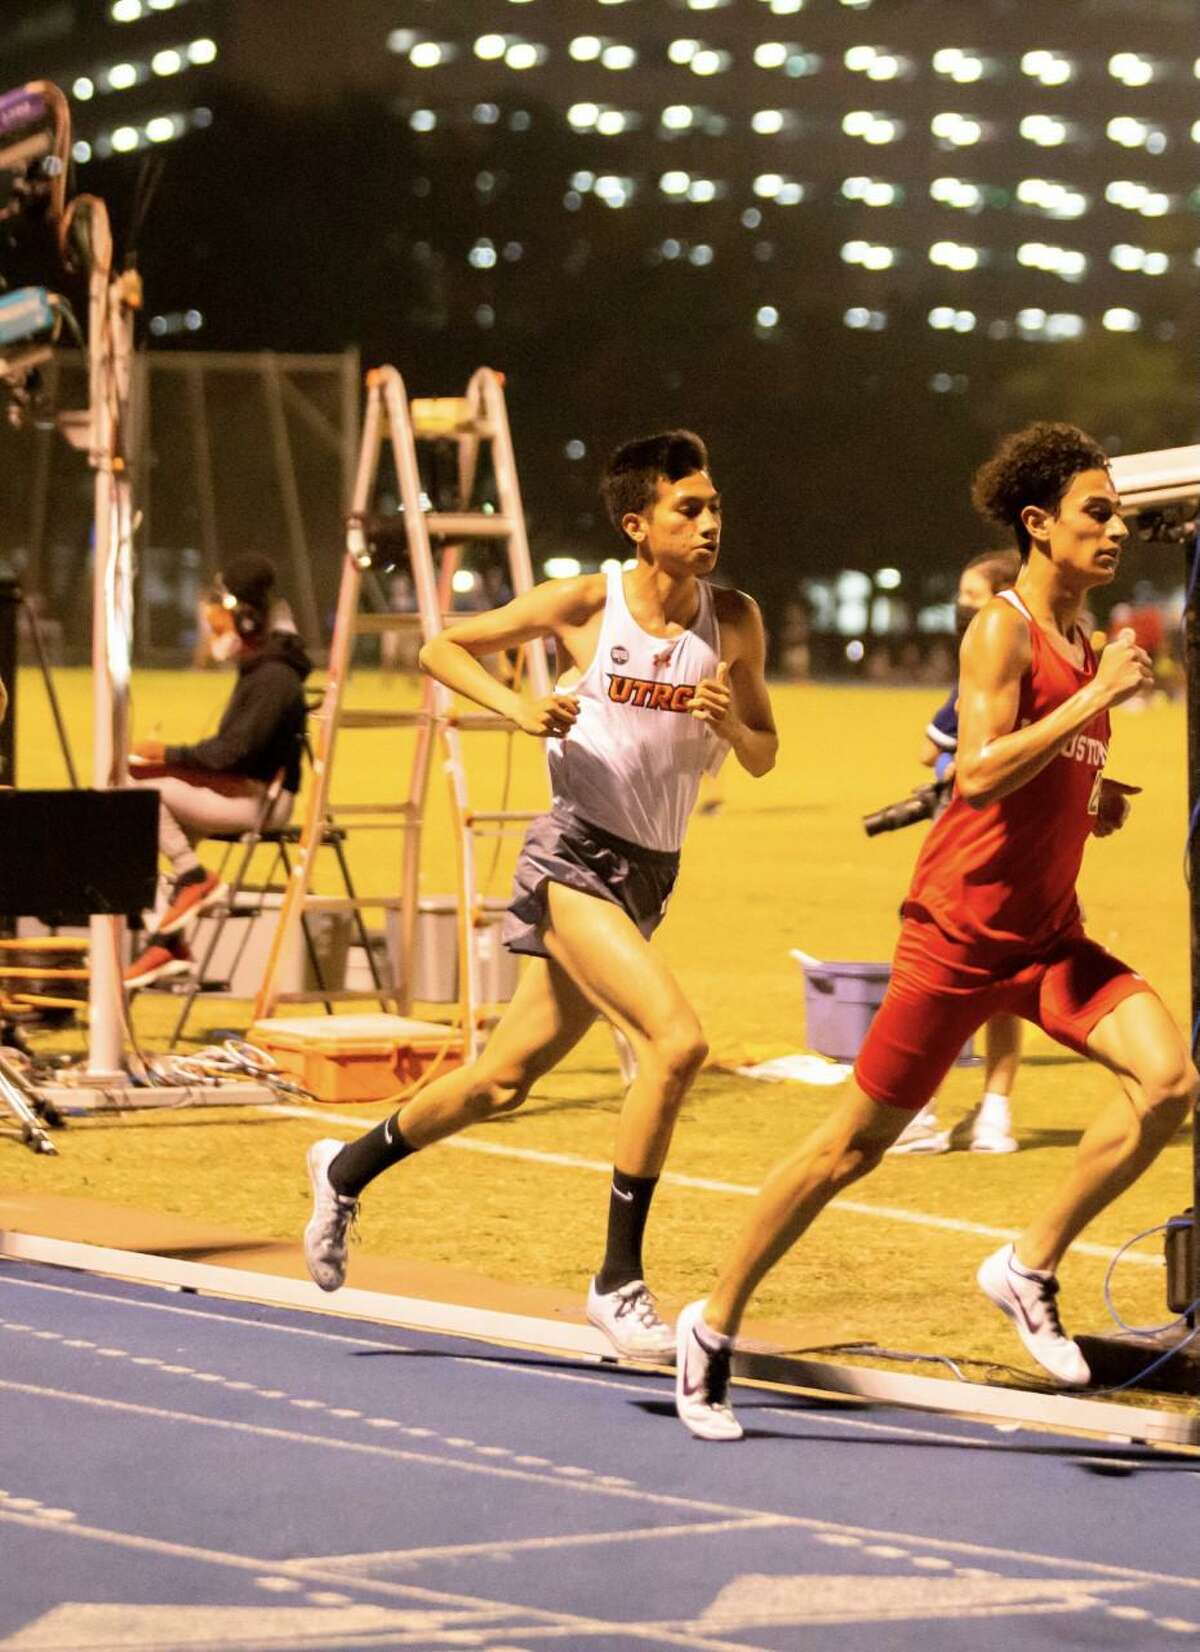 After adjusting to the speed and training of the college level, Alex Munoz is eyeing a big step forward in his junior season running at UTRGV.